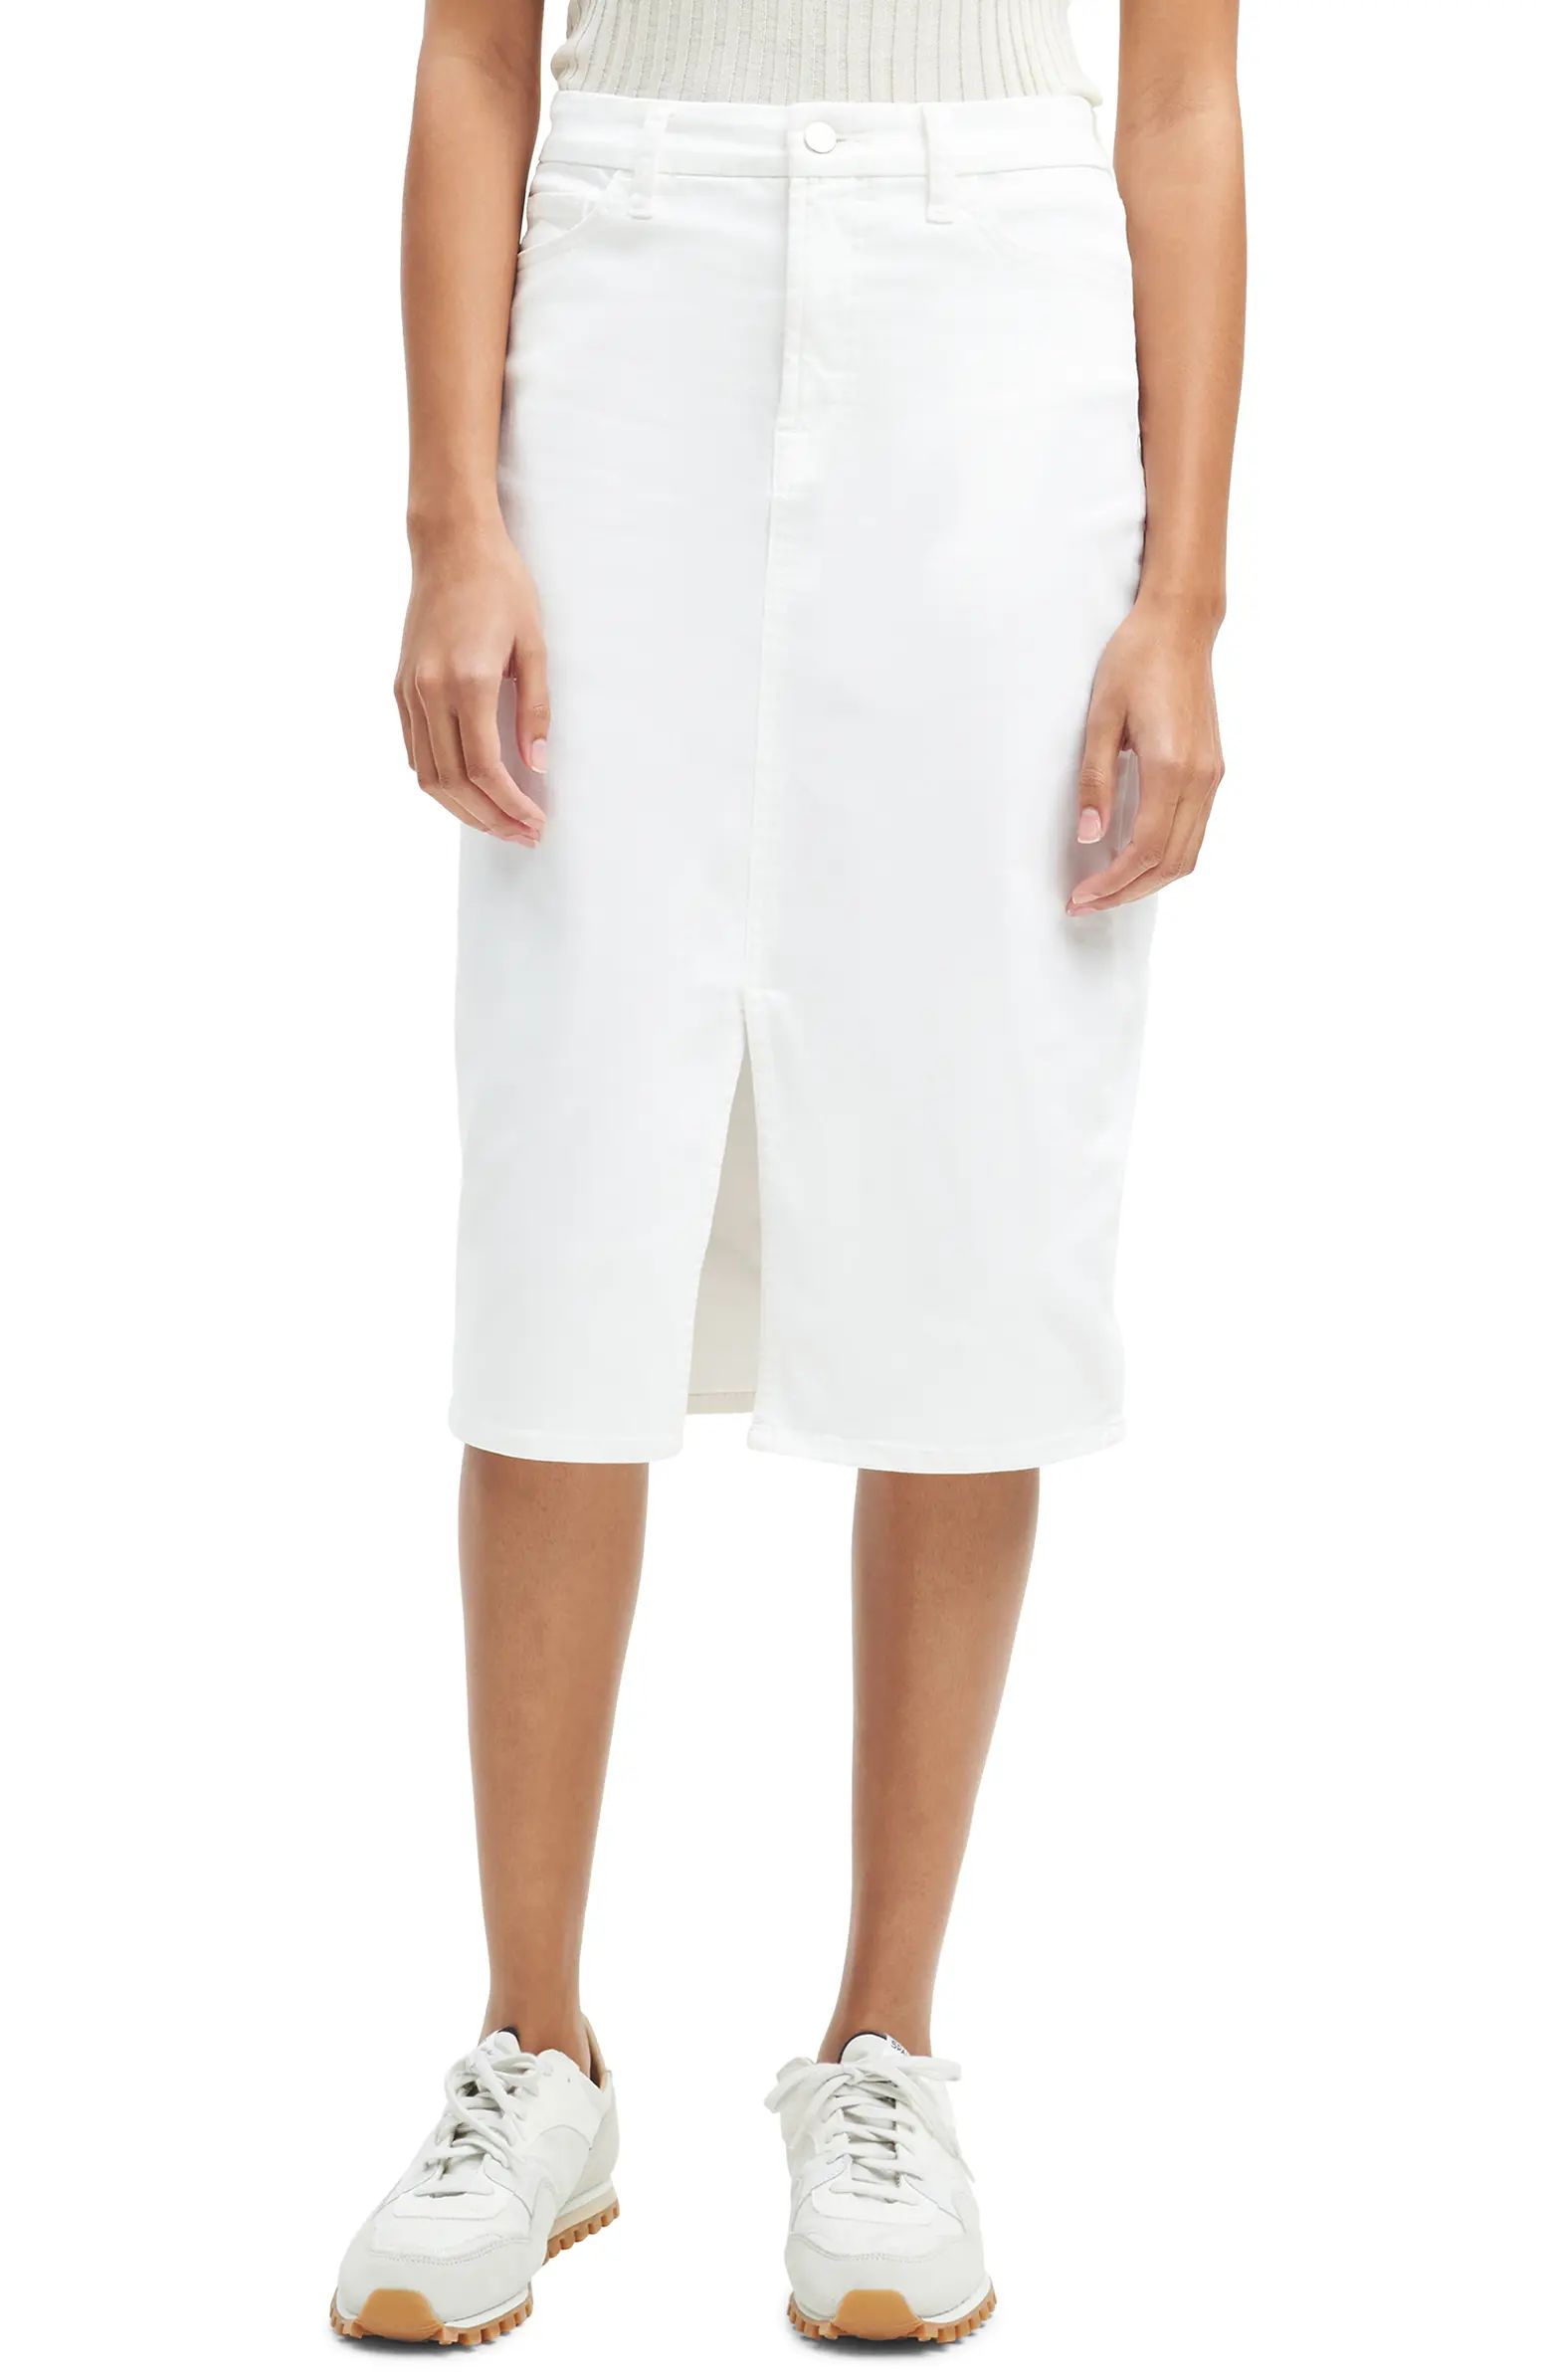 by 7 For All Mankind Denim Pencil Skirt | Nordstrom